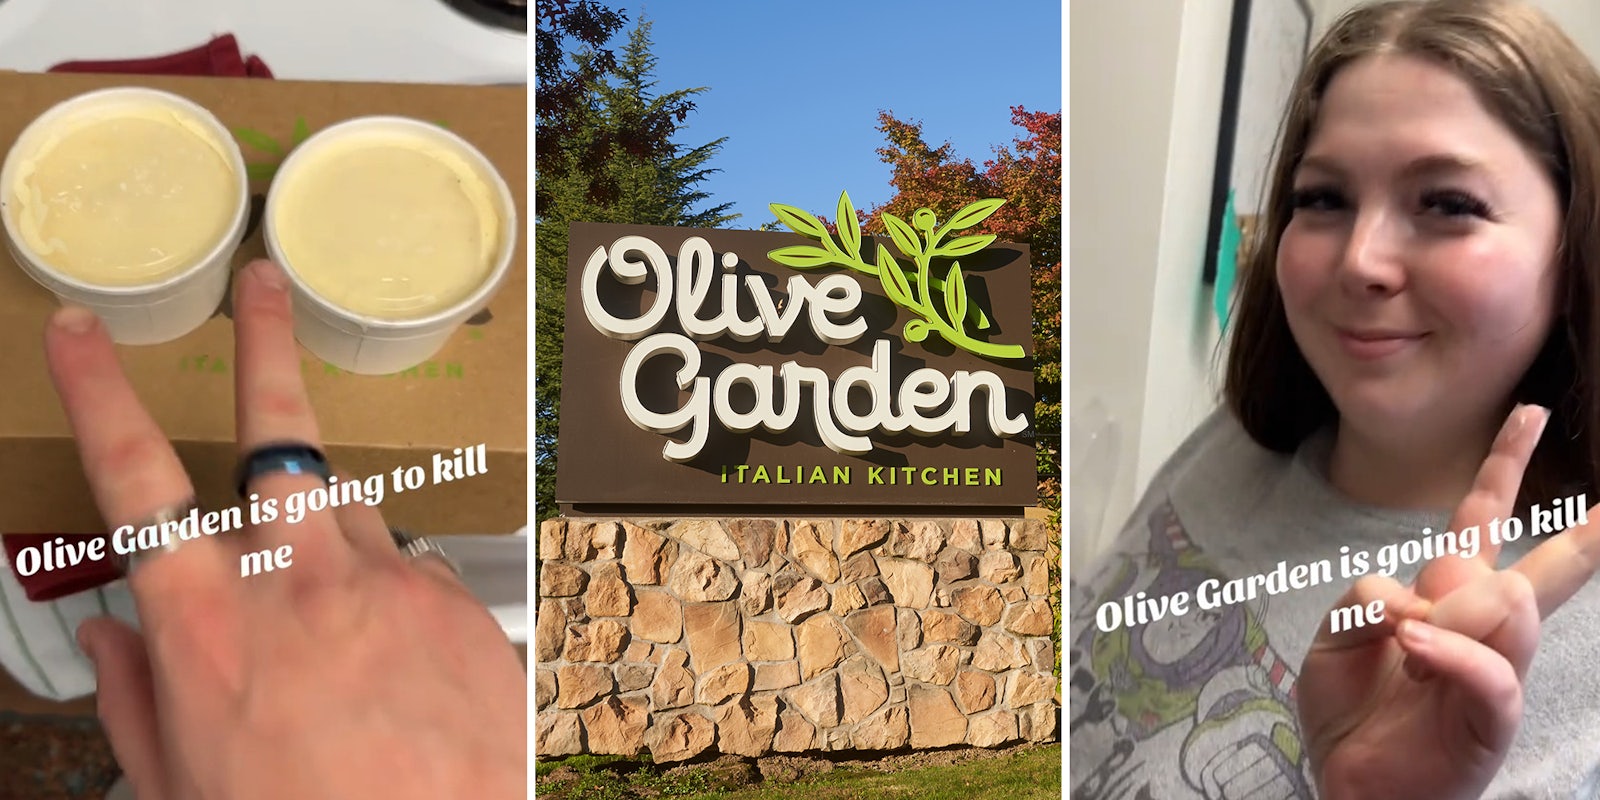 Olive Garden customer shows trick to ordering gift box full of bread sticks